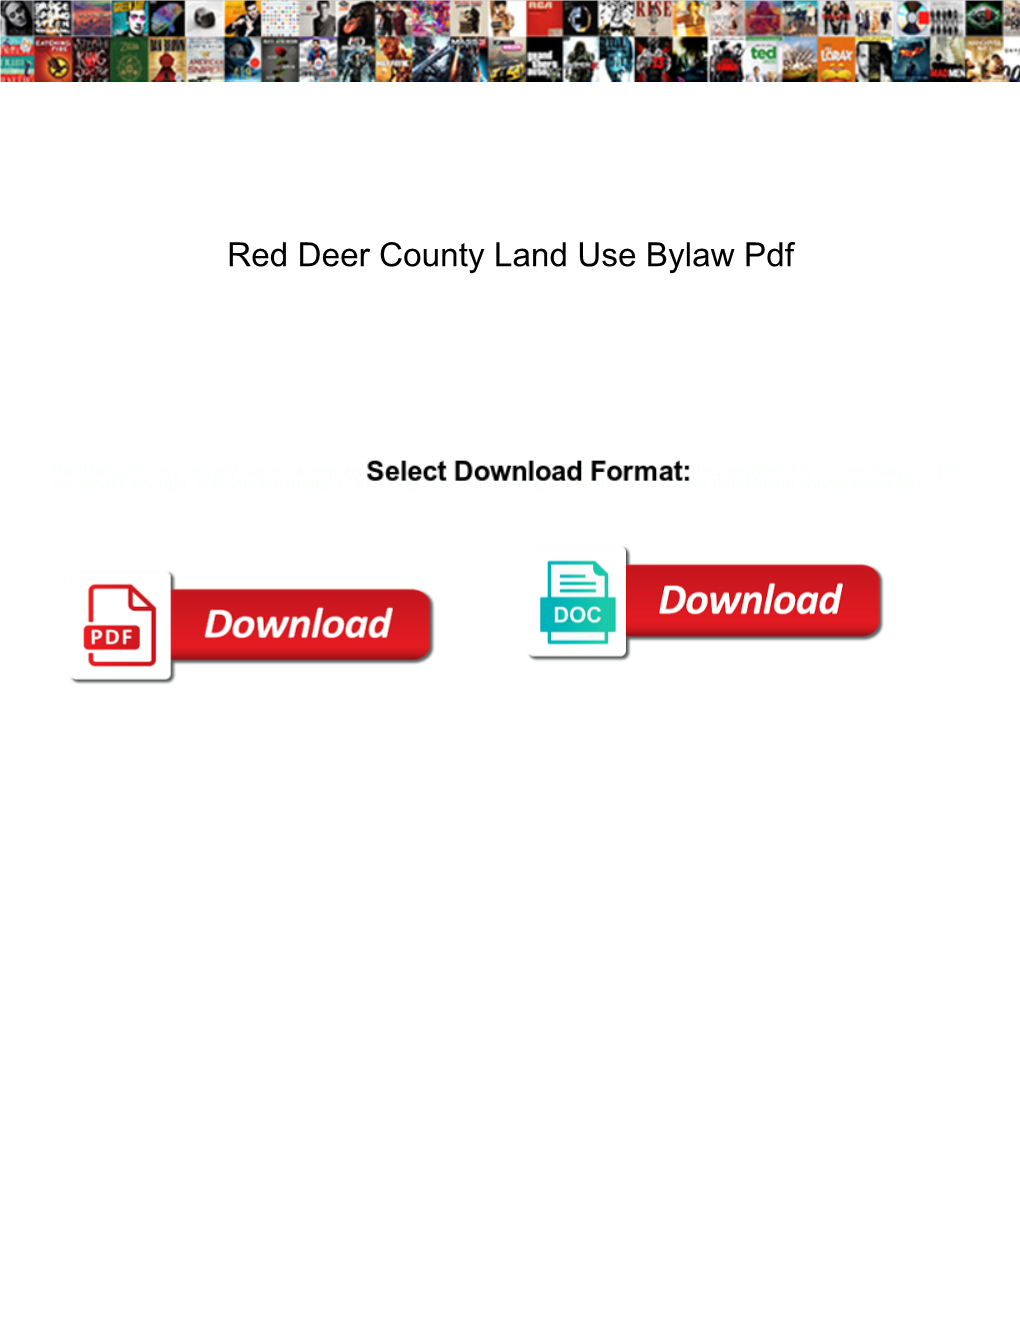 Red Deer County Land Use Bylaw Pdf